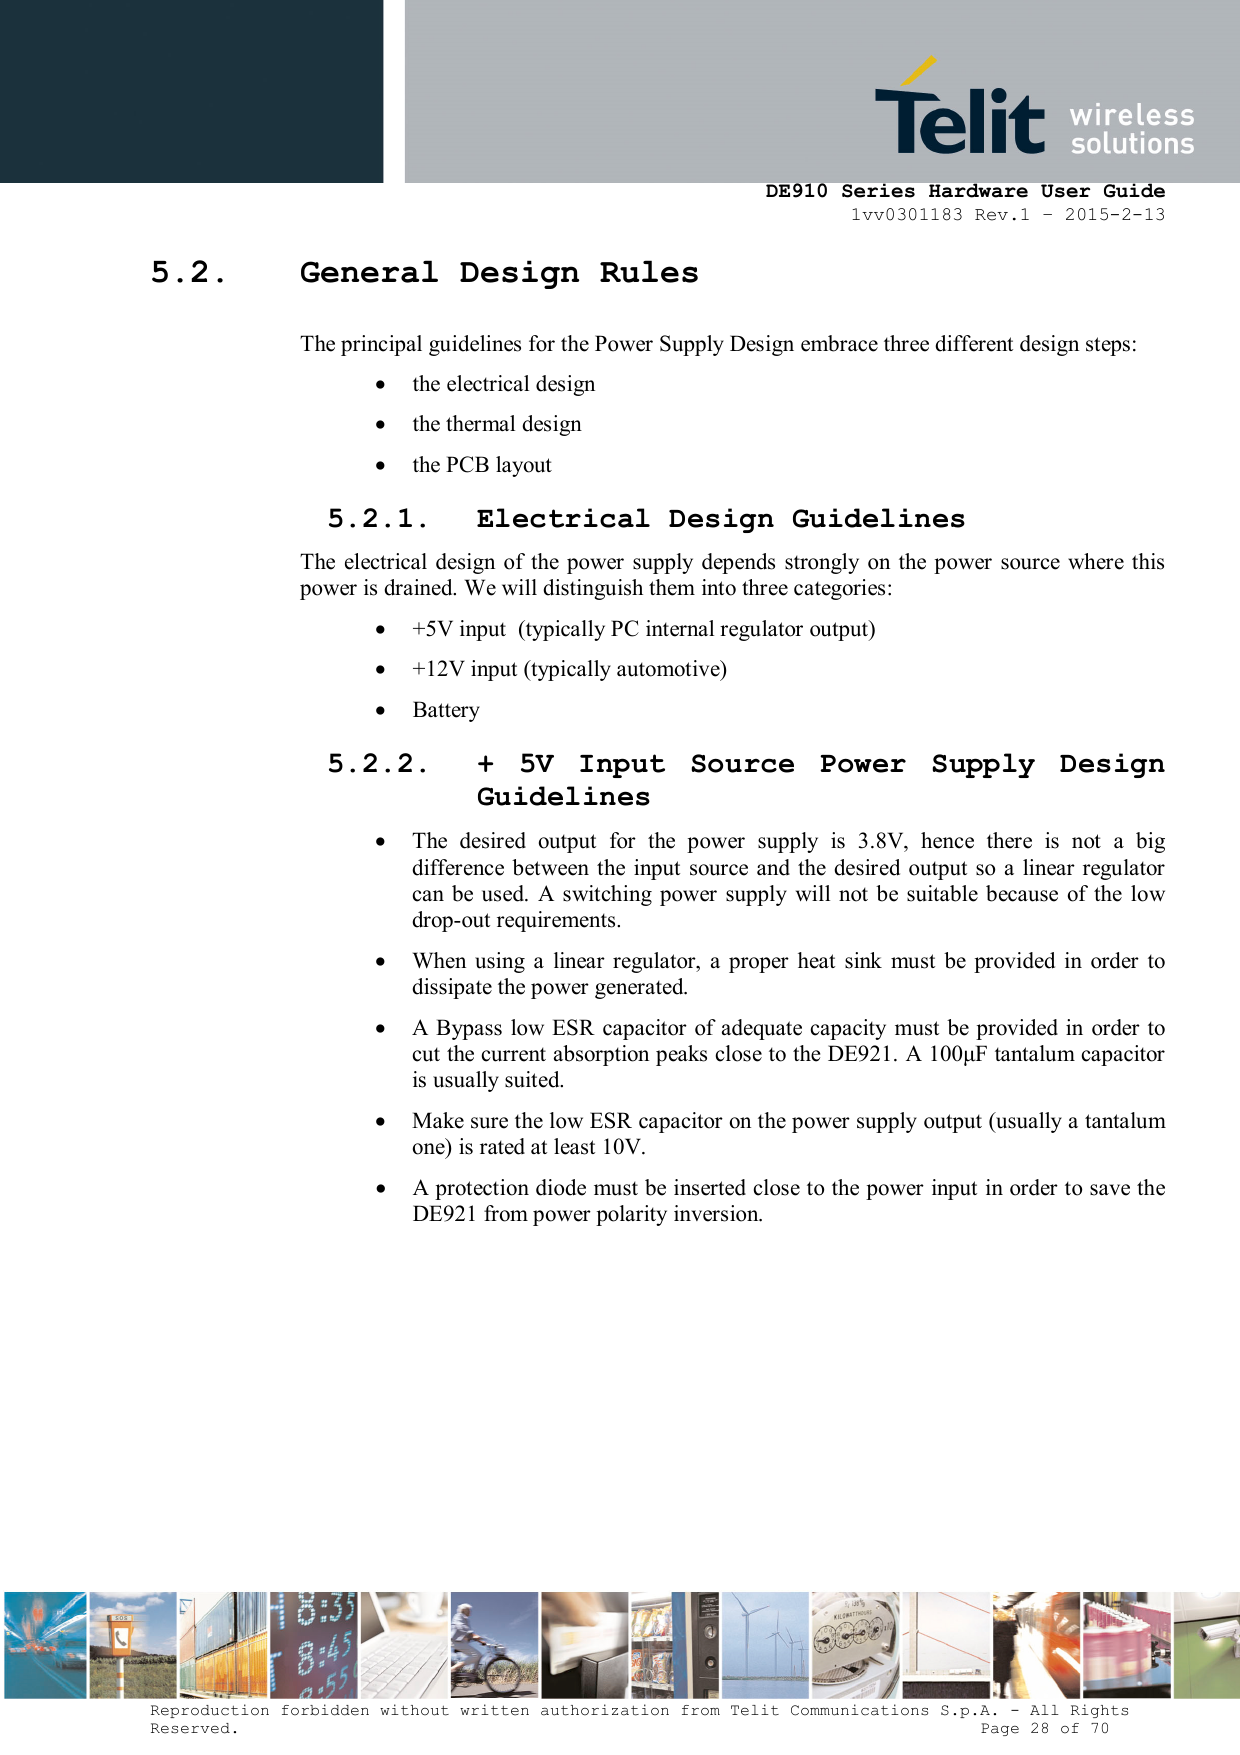      DE910 Series Hardware User Guide 1vv0301183 Rev.1 – 2015-2-13 Reproduction forbidden without written authorization from Telit Communications S.p.A. - All Rights Reserved.                                                                          Page 28 of 70 5.2. General Design Rules The principal guidelines for the Power Supply Design embrace three different design steps:  the electrical design  the thermal design  the PCB layout 5.2.1. Electrical Design Guidelines The  electrical  design  of the  power  supply  depends strongly  on  the  power  source  where this power is drained. We will distinguish them into three categories:  +5V input  (typically PC internal regulator output)  +12V input (typically automotive)  Battery 5.2.2. +  5V  Input  Source  Power  Supply  Design Guidelines  The  desired  output  for  the  power  supply  is  3.8V,  hence  there  is  not  a  big difference  between  the input  source  and  the  desired  output so  a linear  regulator can be used.  A  switching  power  supply  will not  be  suitable  because  of  the  low drop-out requirements.  When  using  a  linear  regulator,  a  proper  heat  sink  must  be  provided  in  order  to dissipate the power generated.  A  Bypass low ESR capacitor of adequate capacity  must be  provided in  order to cut the current absorption peaks close to the DE921. A 100μF tantalum capacitor is usually suited.  Make sure the low ESR capacitor on the power supply output (usually a tantalum one) is rated at least 10V.  A protection diode must be inserted close to the power input in order to save the DE921 from power polarity inversion.         